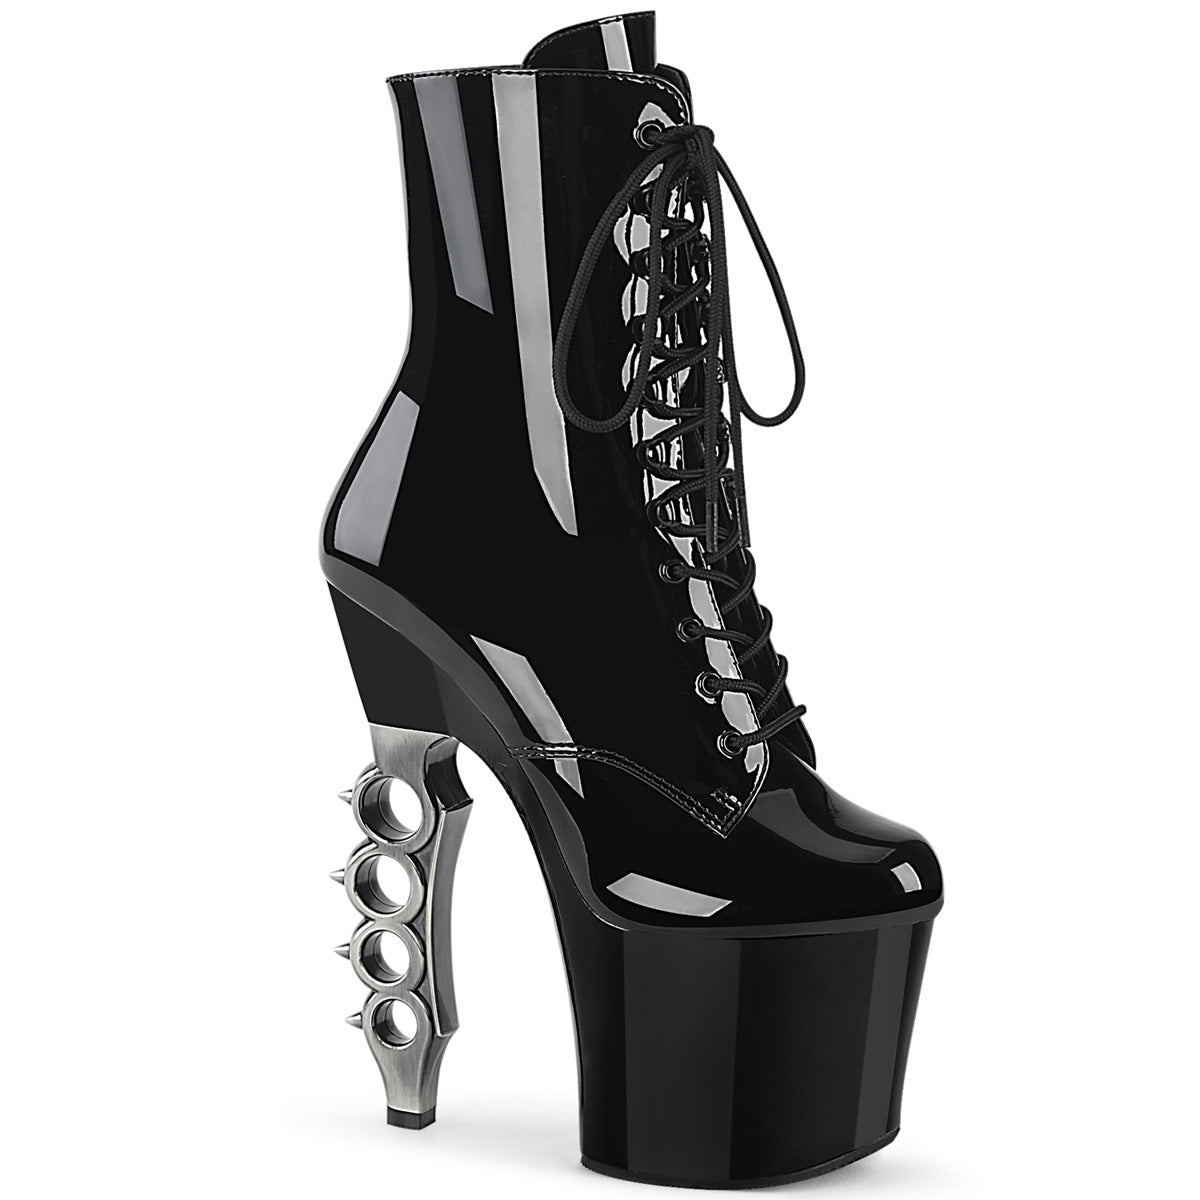 IRONGRIP-1020 Pleaser Pole Dancing Shoes Ankle Boots Pleasers - Sexy Shoes